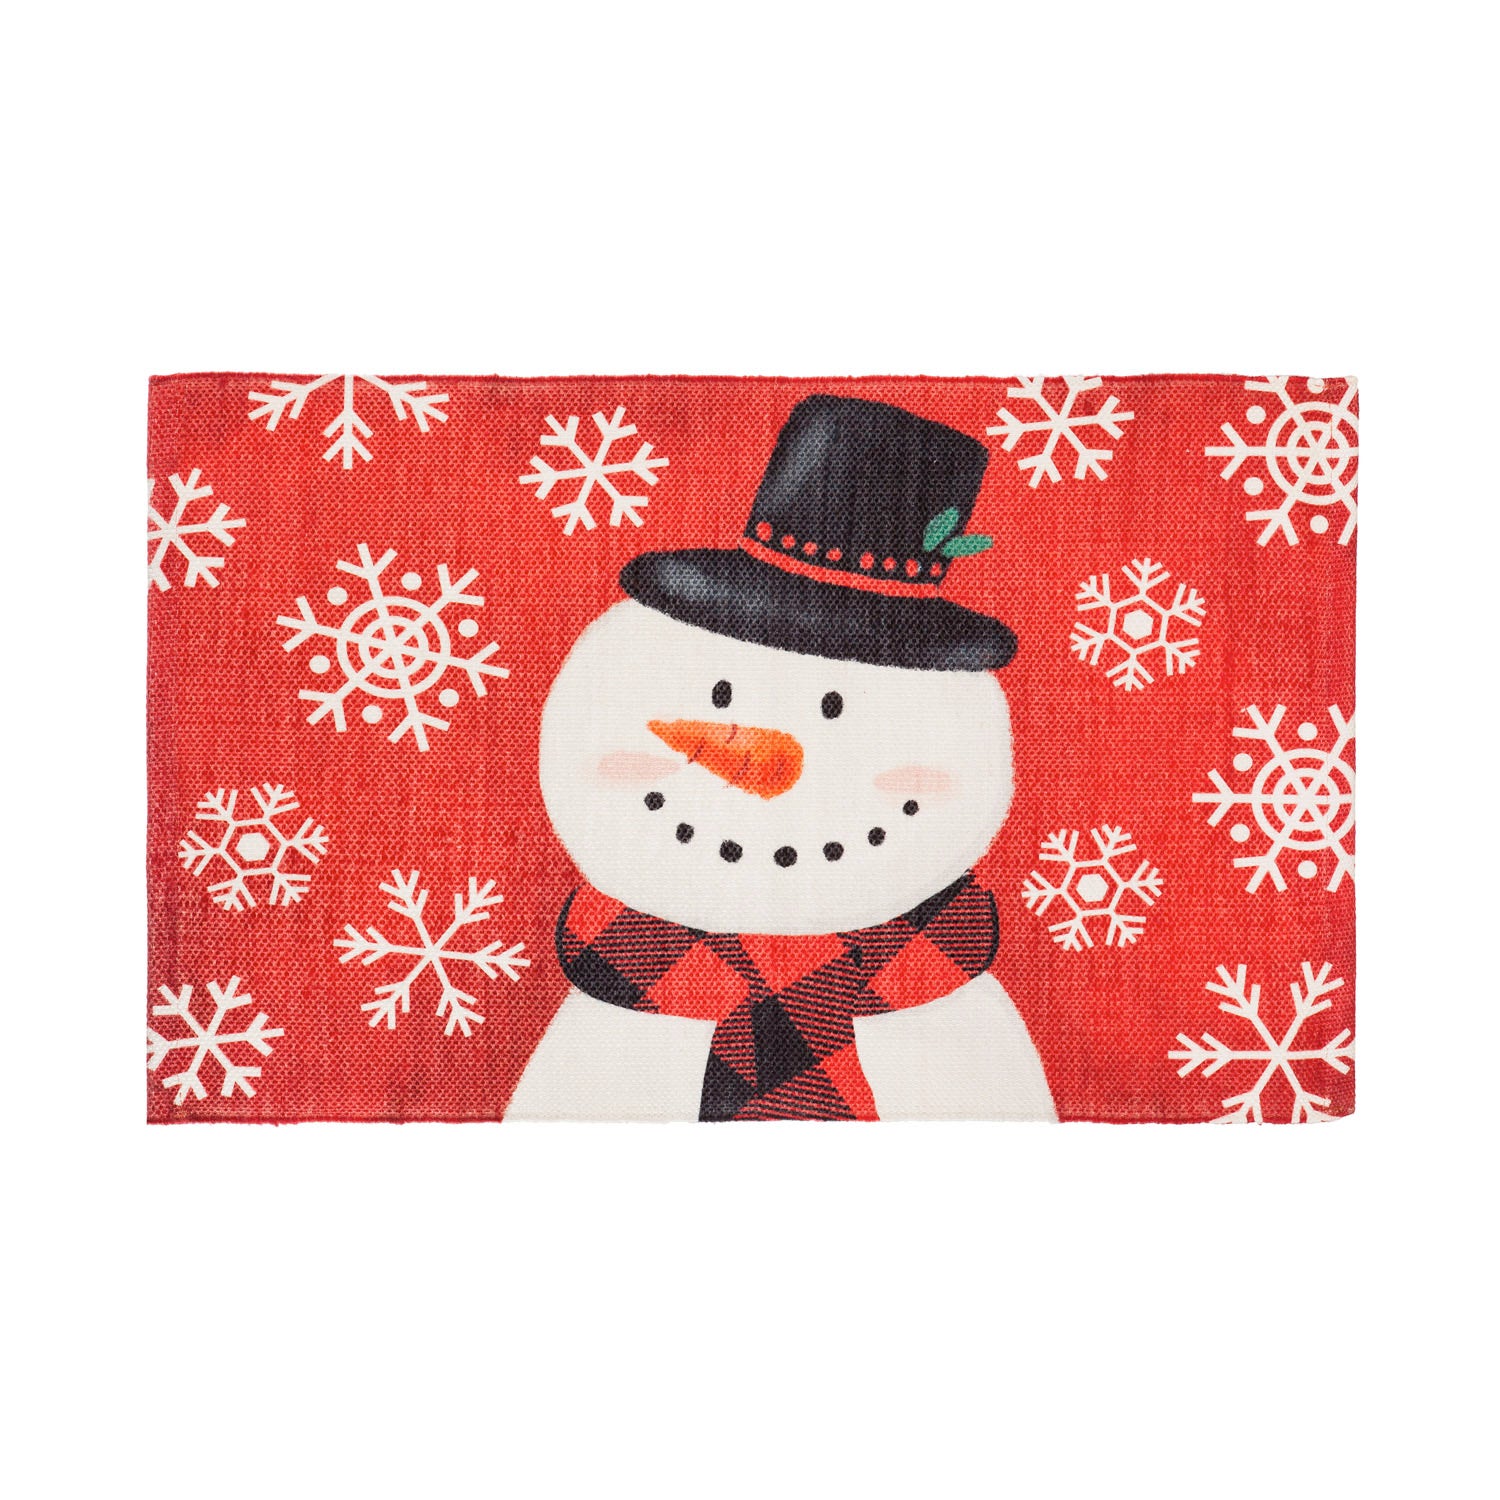 30'' x 20'' Snowman Scatter Rug